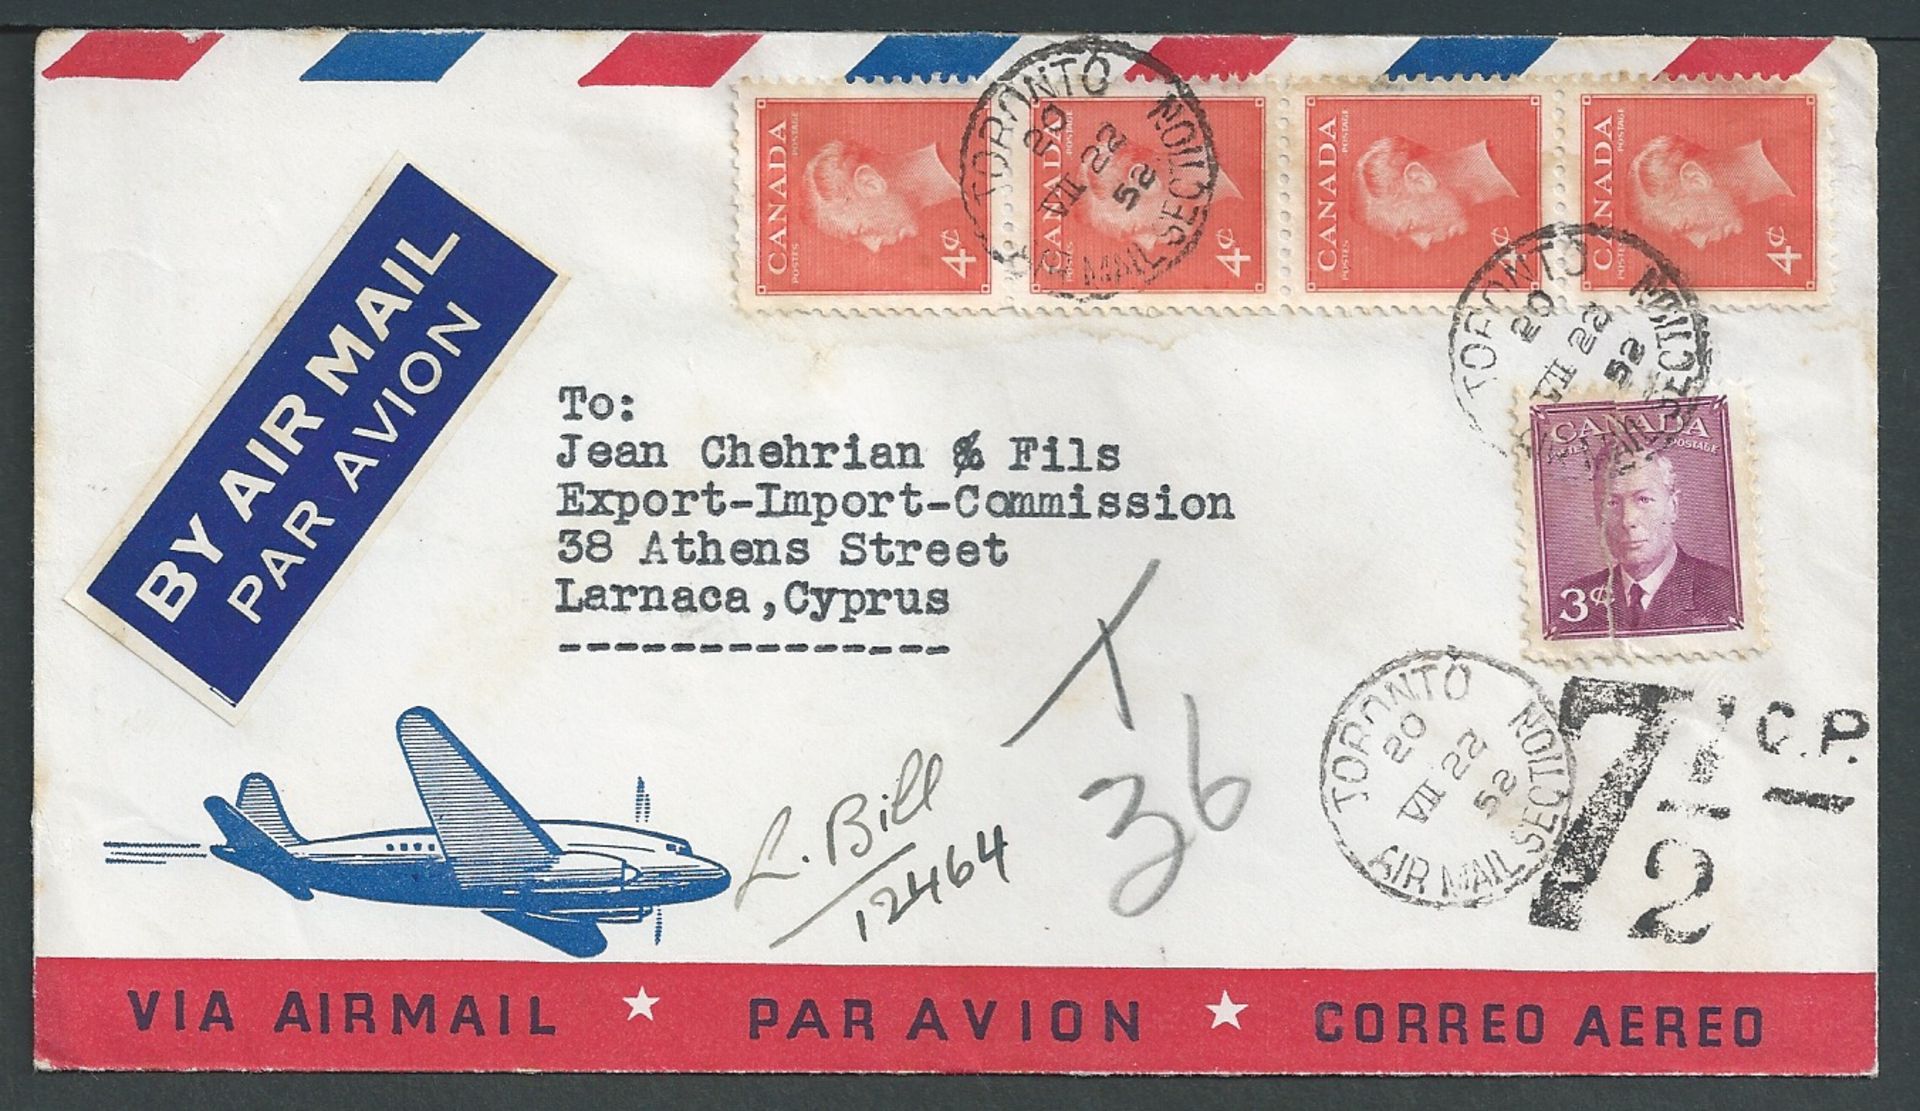 Cyprus 1952 Air mail cover from Canada to Larnaca franked 19c, marked "T36" and handstamped with ver